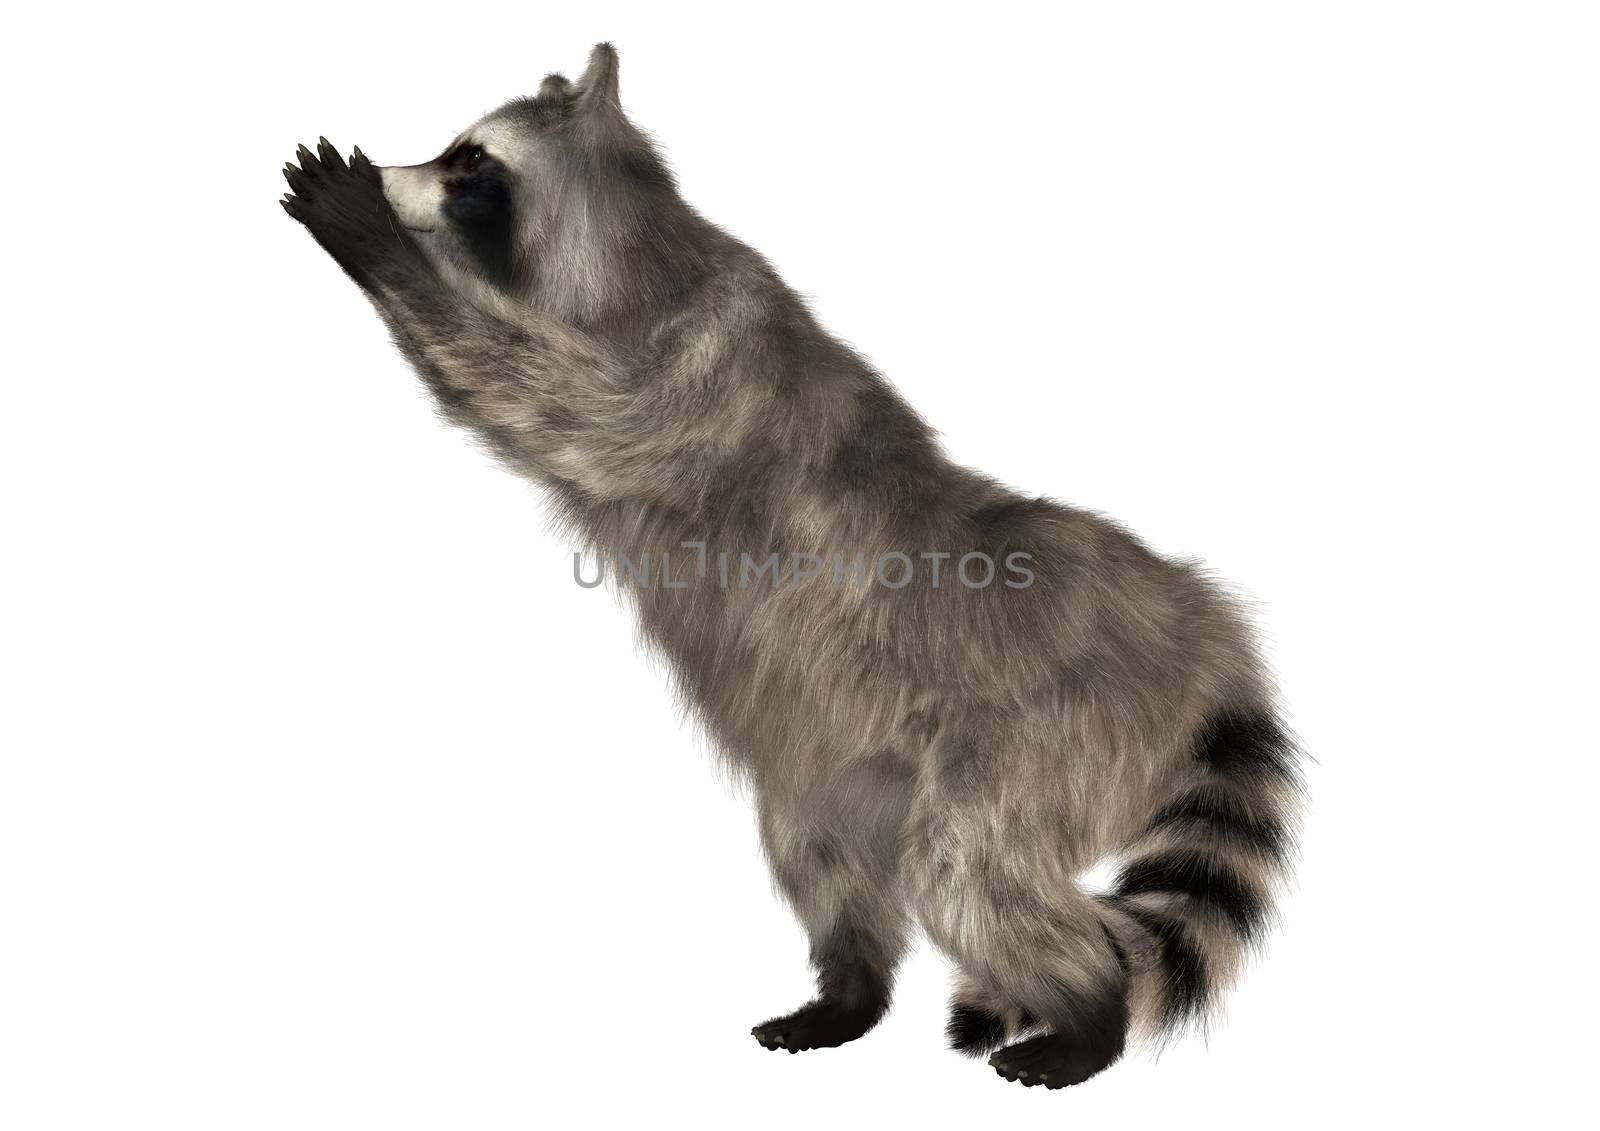 3D digital render of a raccoon iisolated on white background